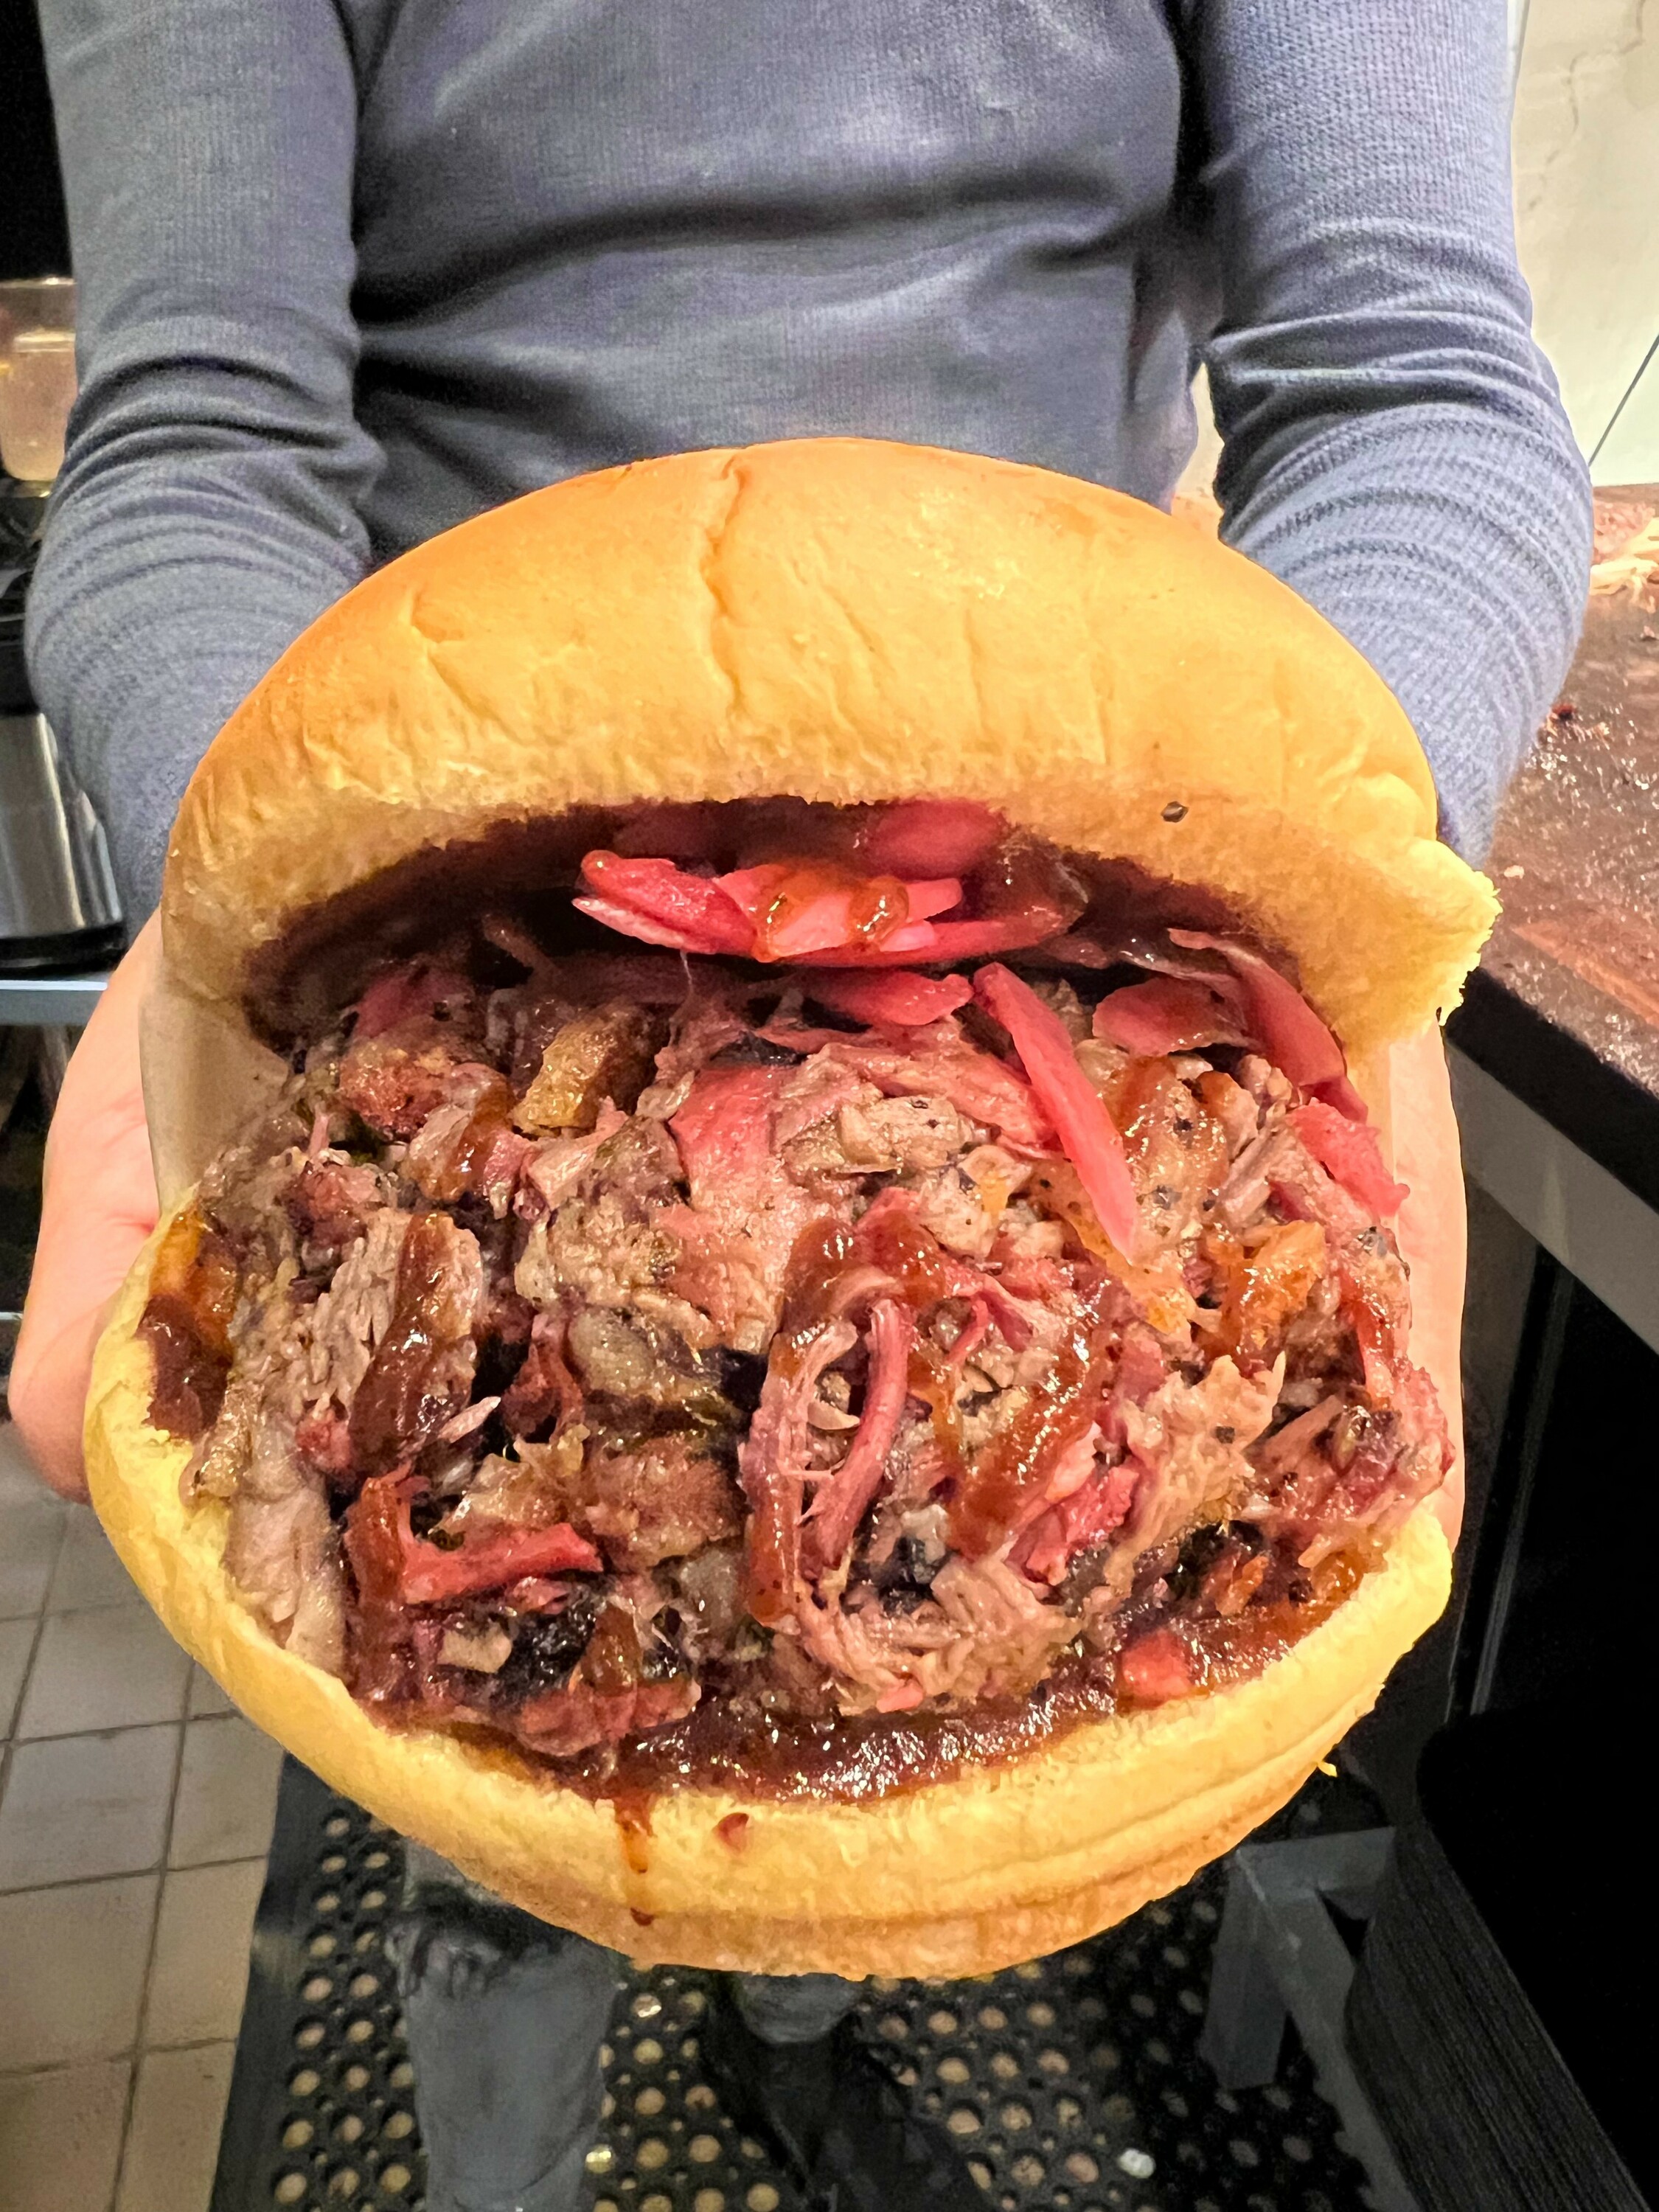 The New York Times listed this sandwich as one of the best in NYC